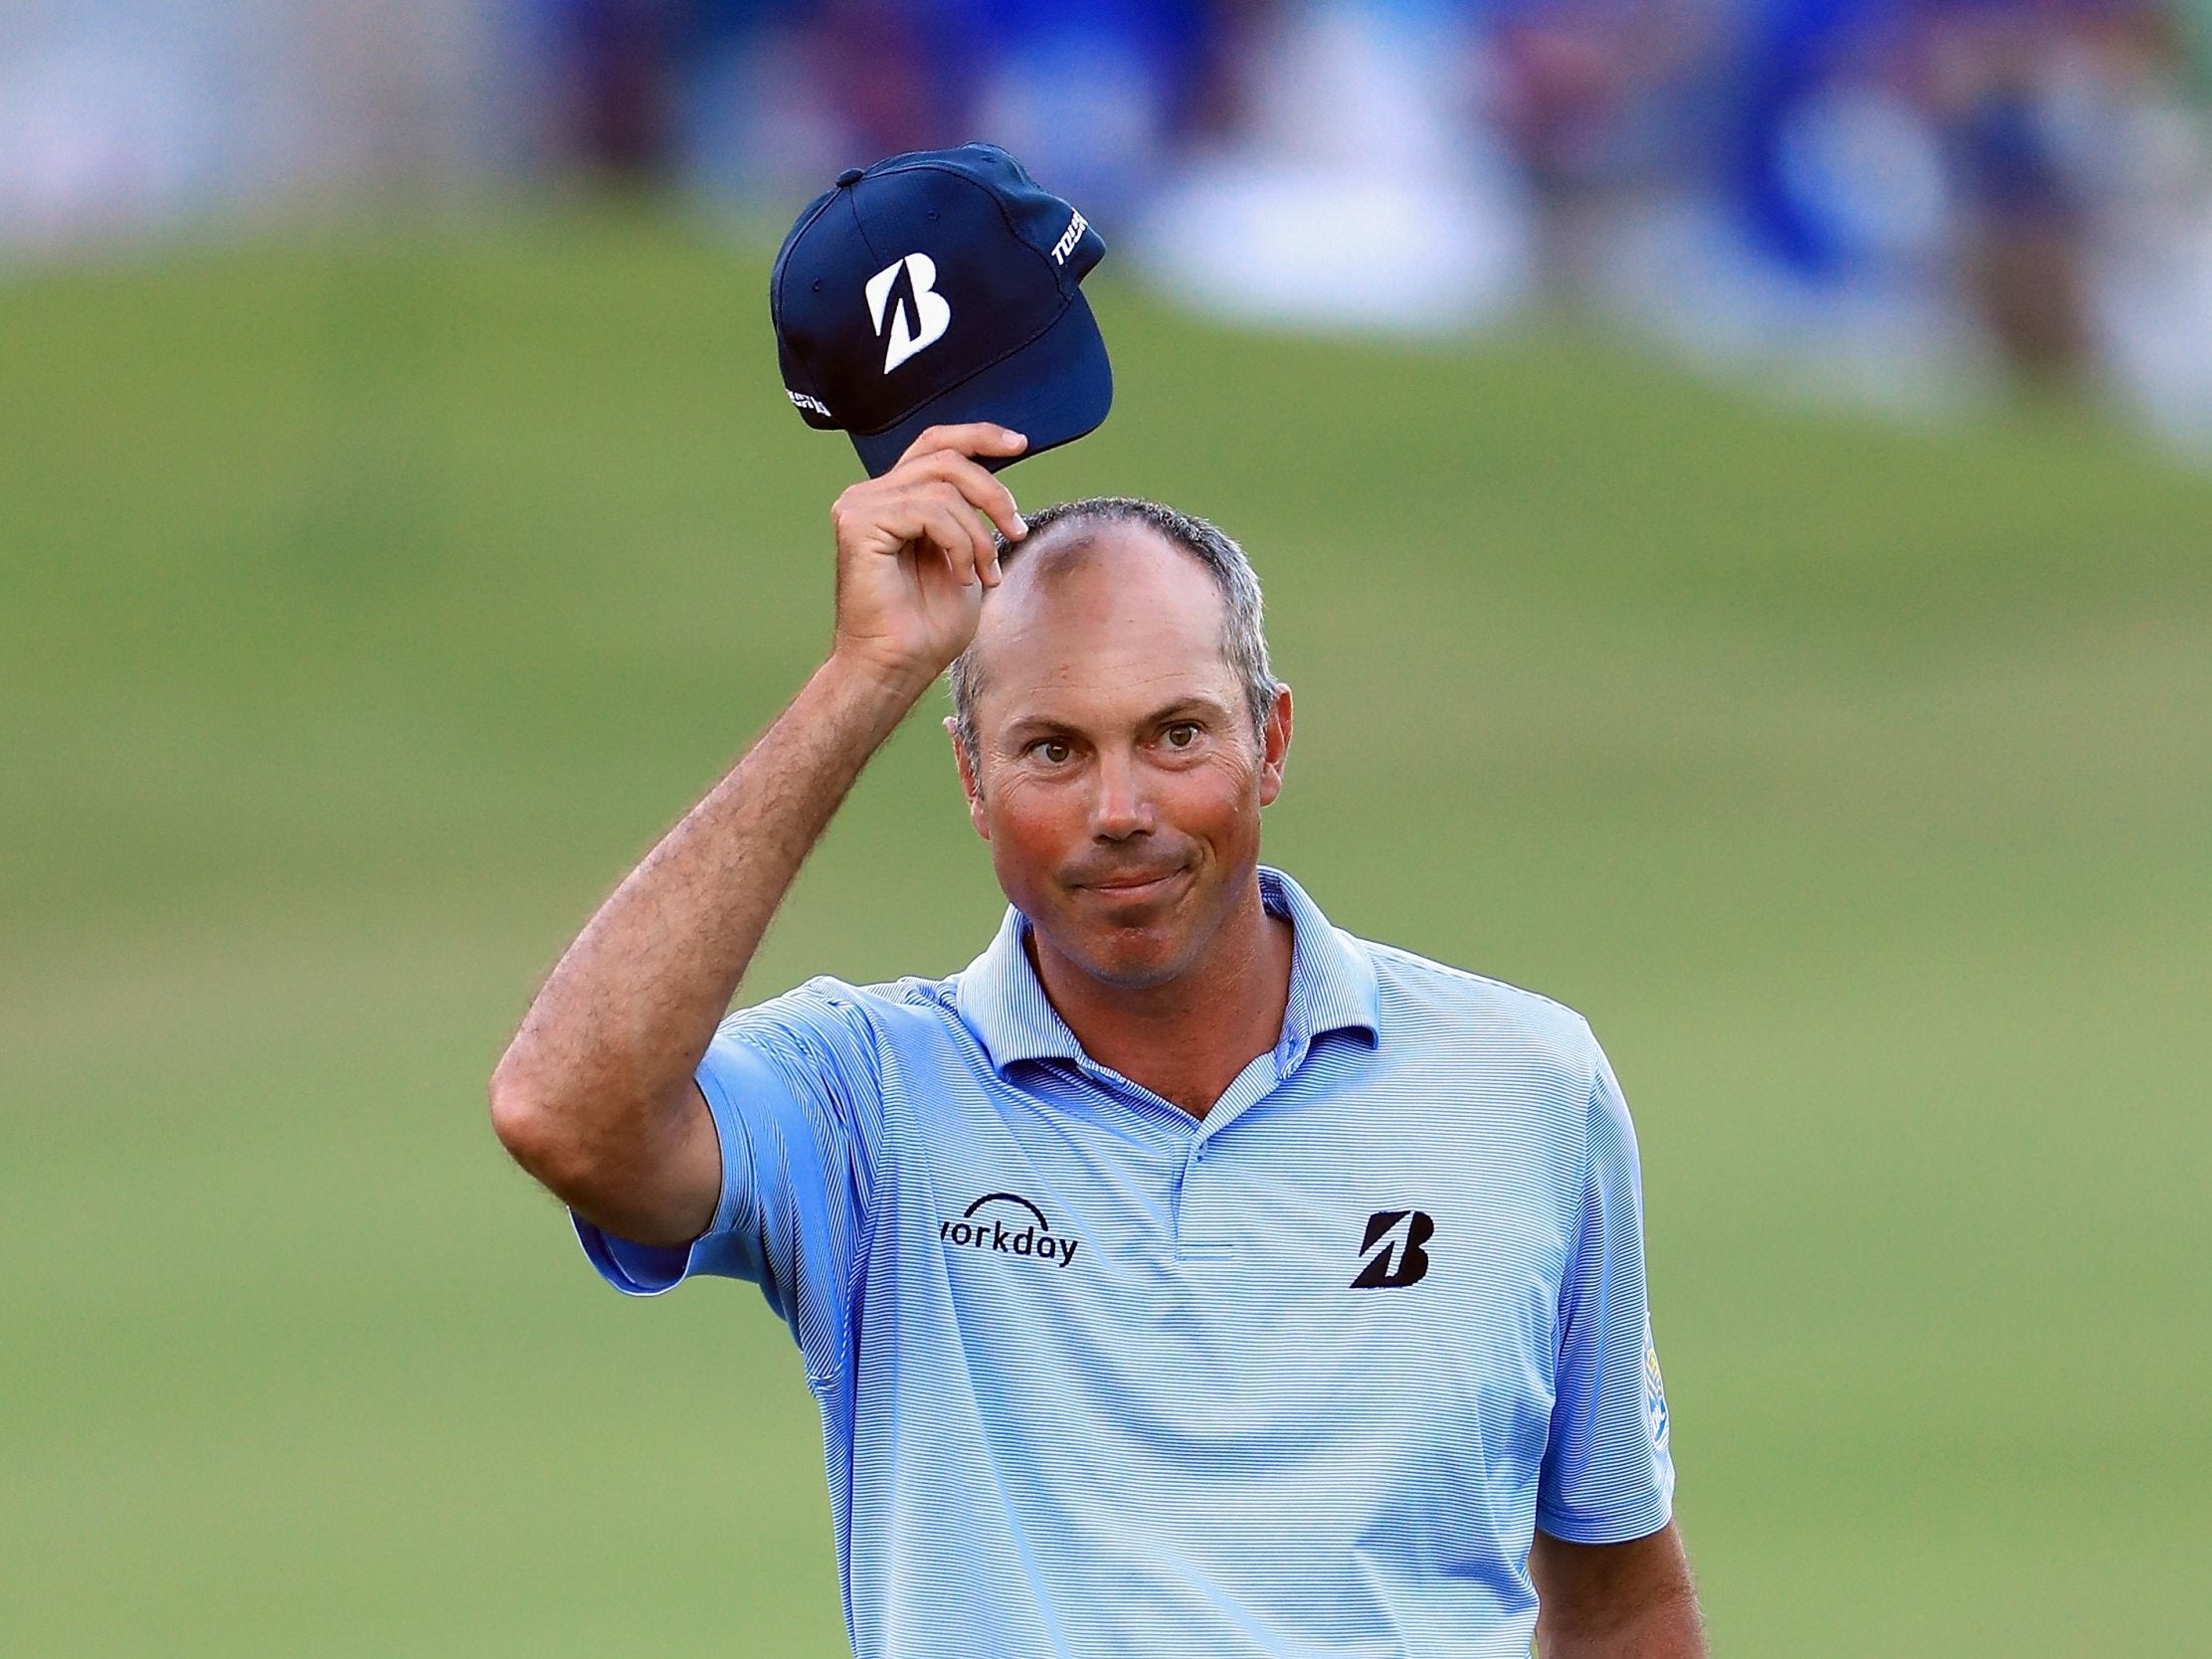 Kuchar leads by two after three rounds in Honolulu